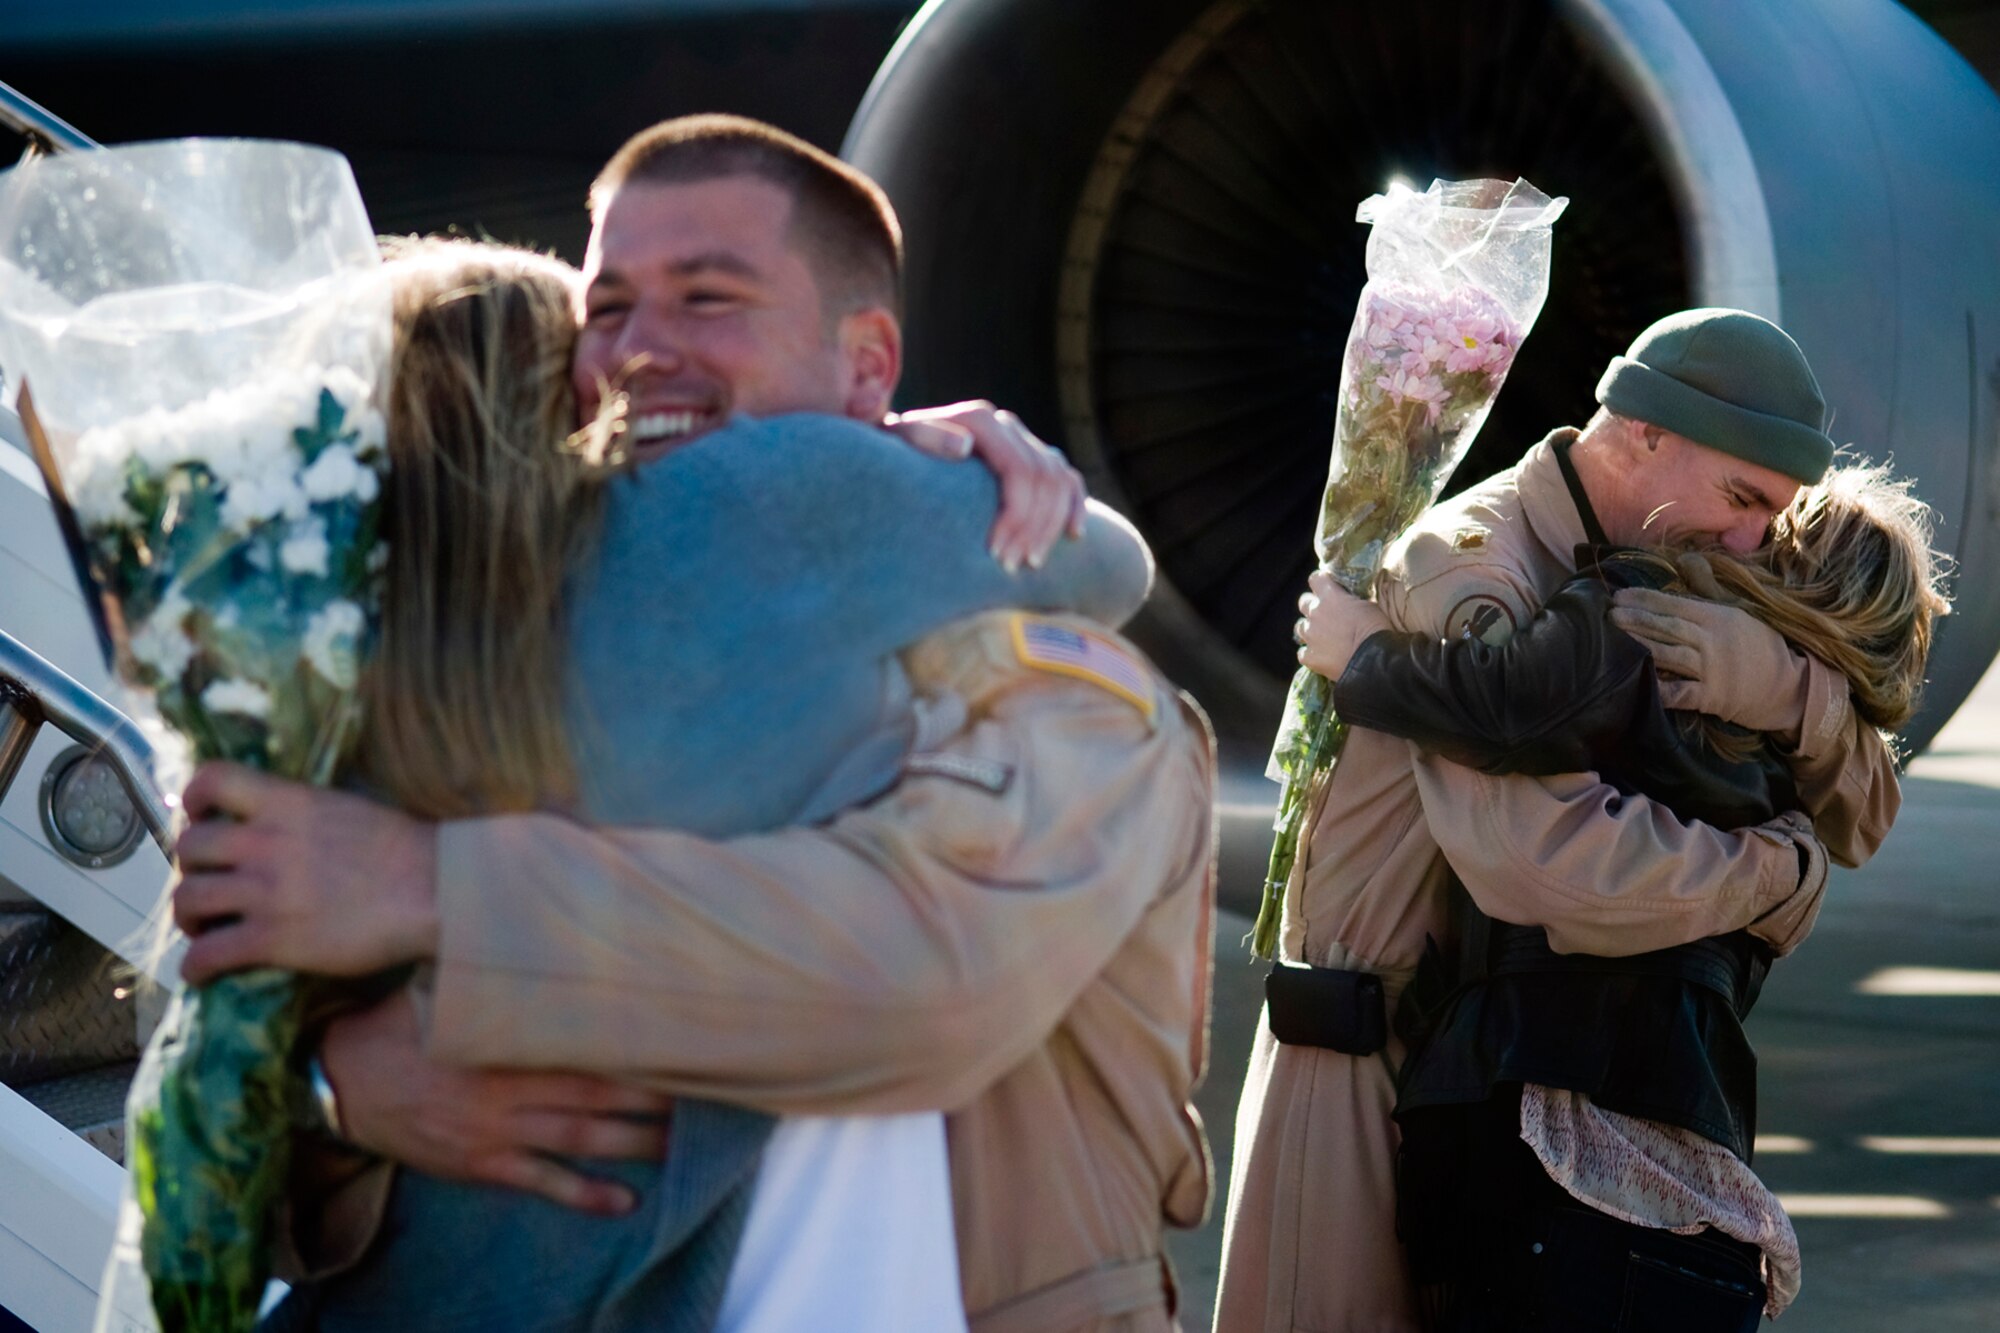 GRISSOM AIR RESERVE BASE, Ind. -- Capt. Jacob Creel, left, and Maj. Billy Werth hug their wives after returning to Grissom from a deployment to Southwest Asia Jan. 5. Stephanie Creel and Haley Werth were both able to welcome back their loved ones after not seeing them for over two months. The two 72nd Air Refueling Wing pilots deployed with several other 434th Air Refueling Wing Airmen for over two months in support of Operations Enduing Freedom and Odyssey Dawn. (U.S. Air Force photo/Tech. Sgt. Mark R. W. Orders-Woempner)
